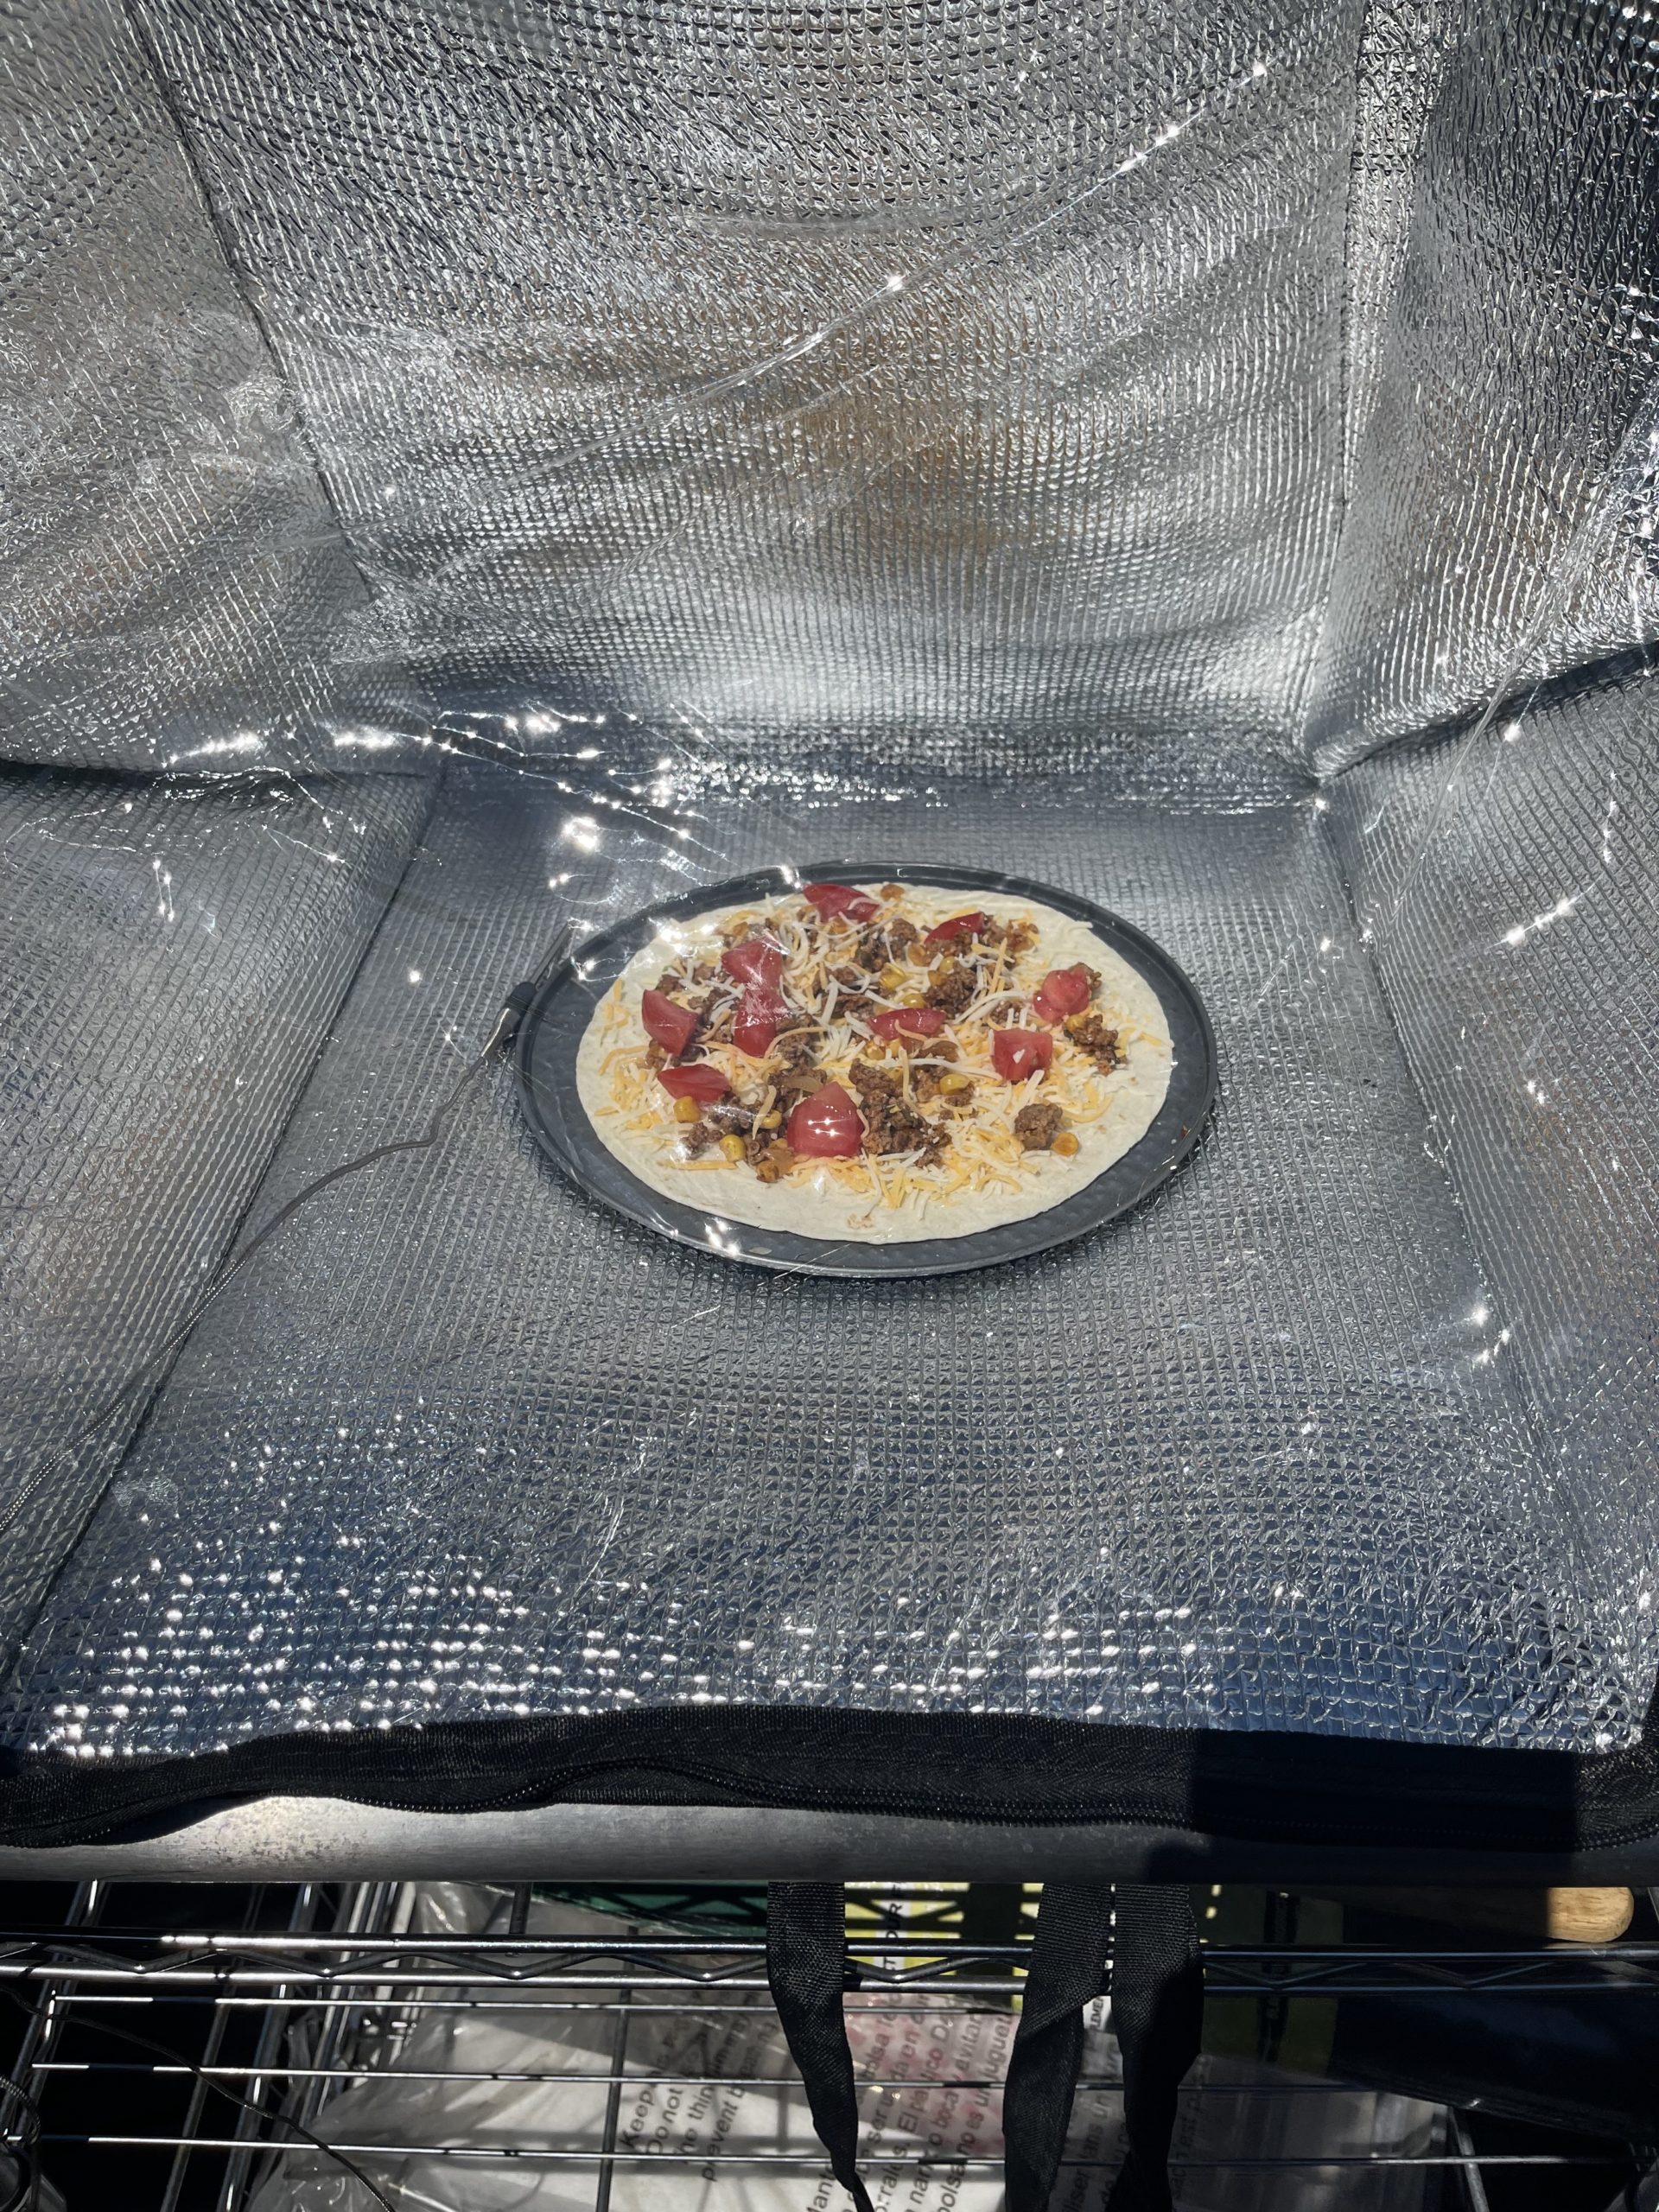 A Mexican pizza cooking in the solar oven